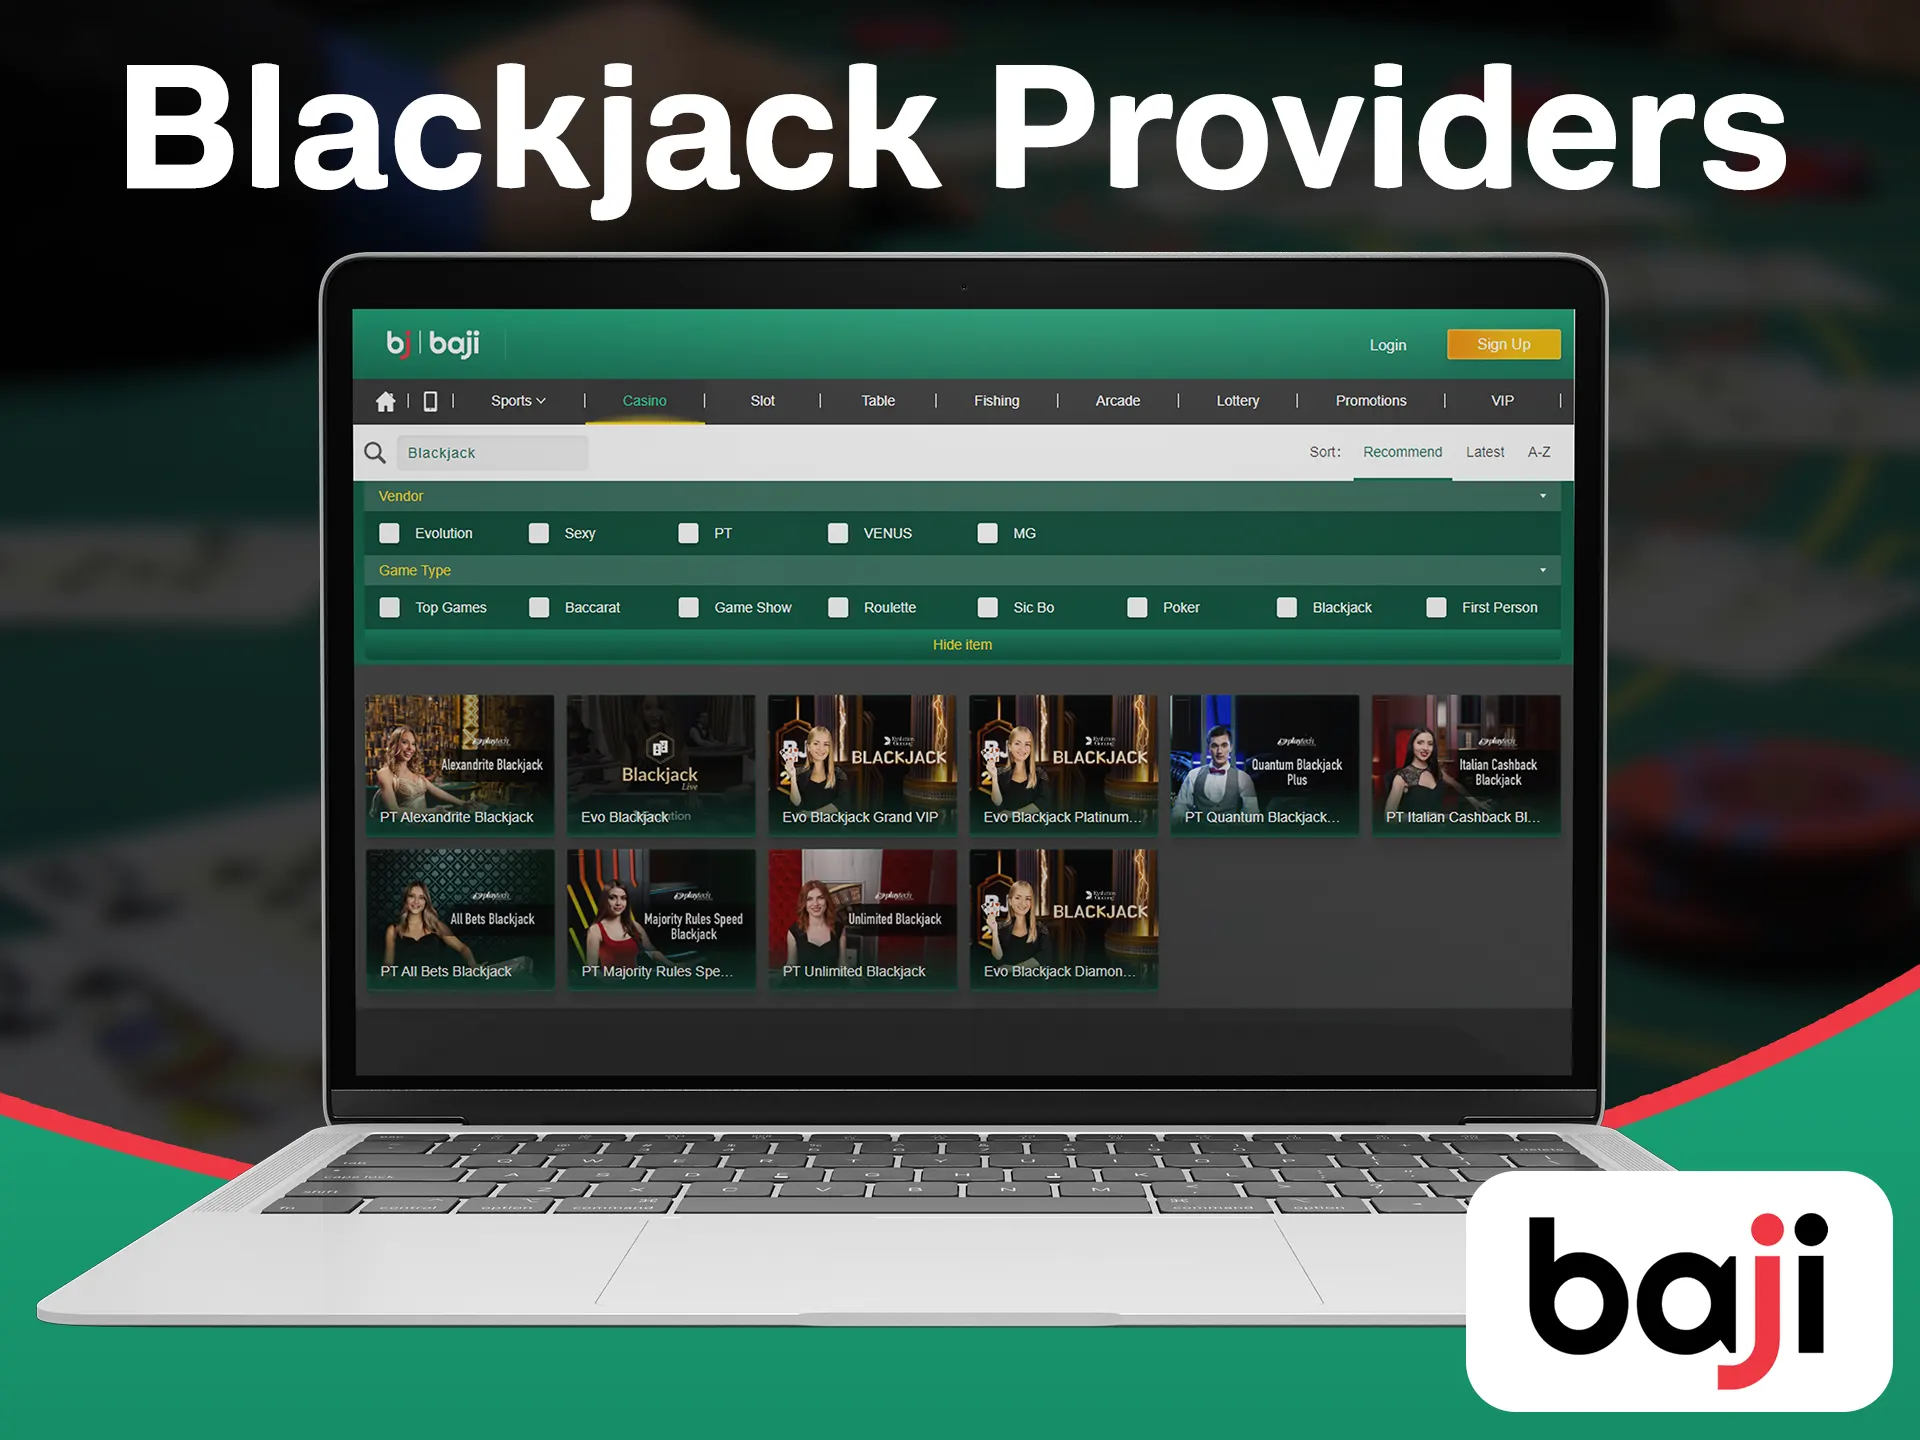 Try different blackjack games from each provider at the Baji.